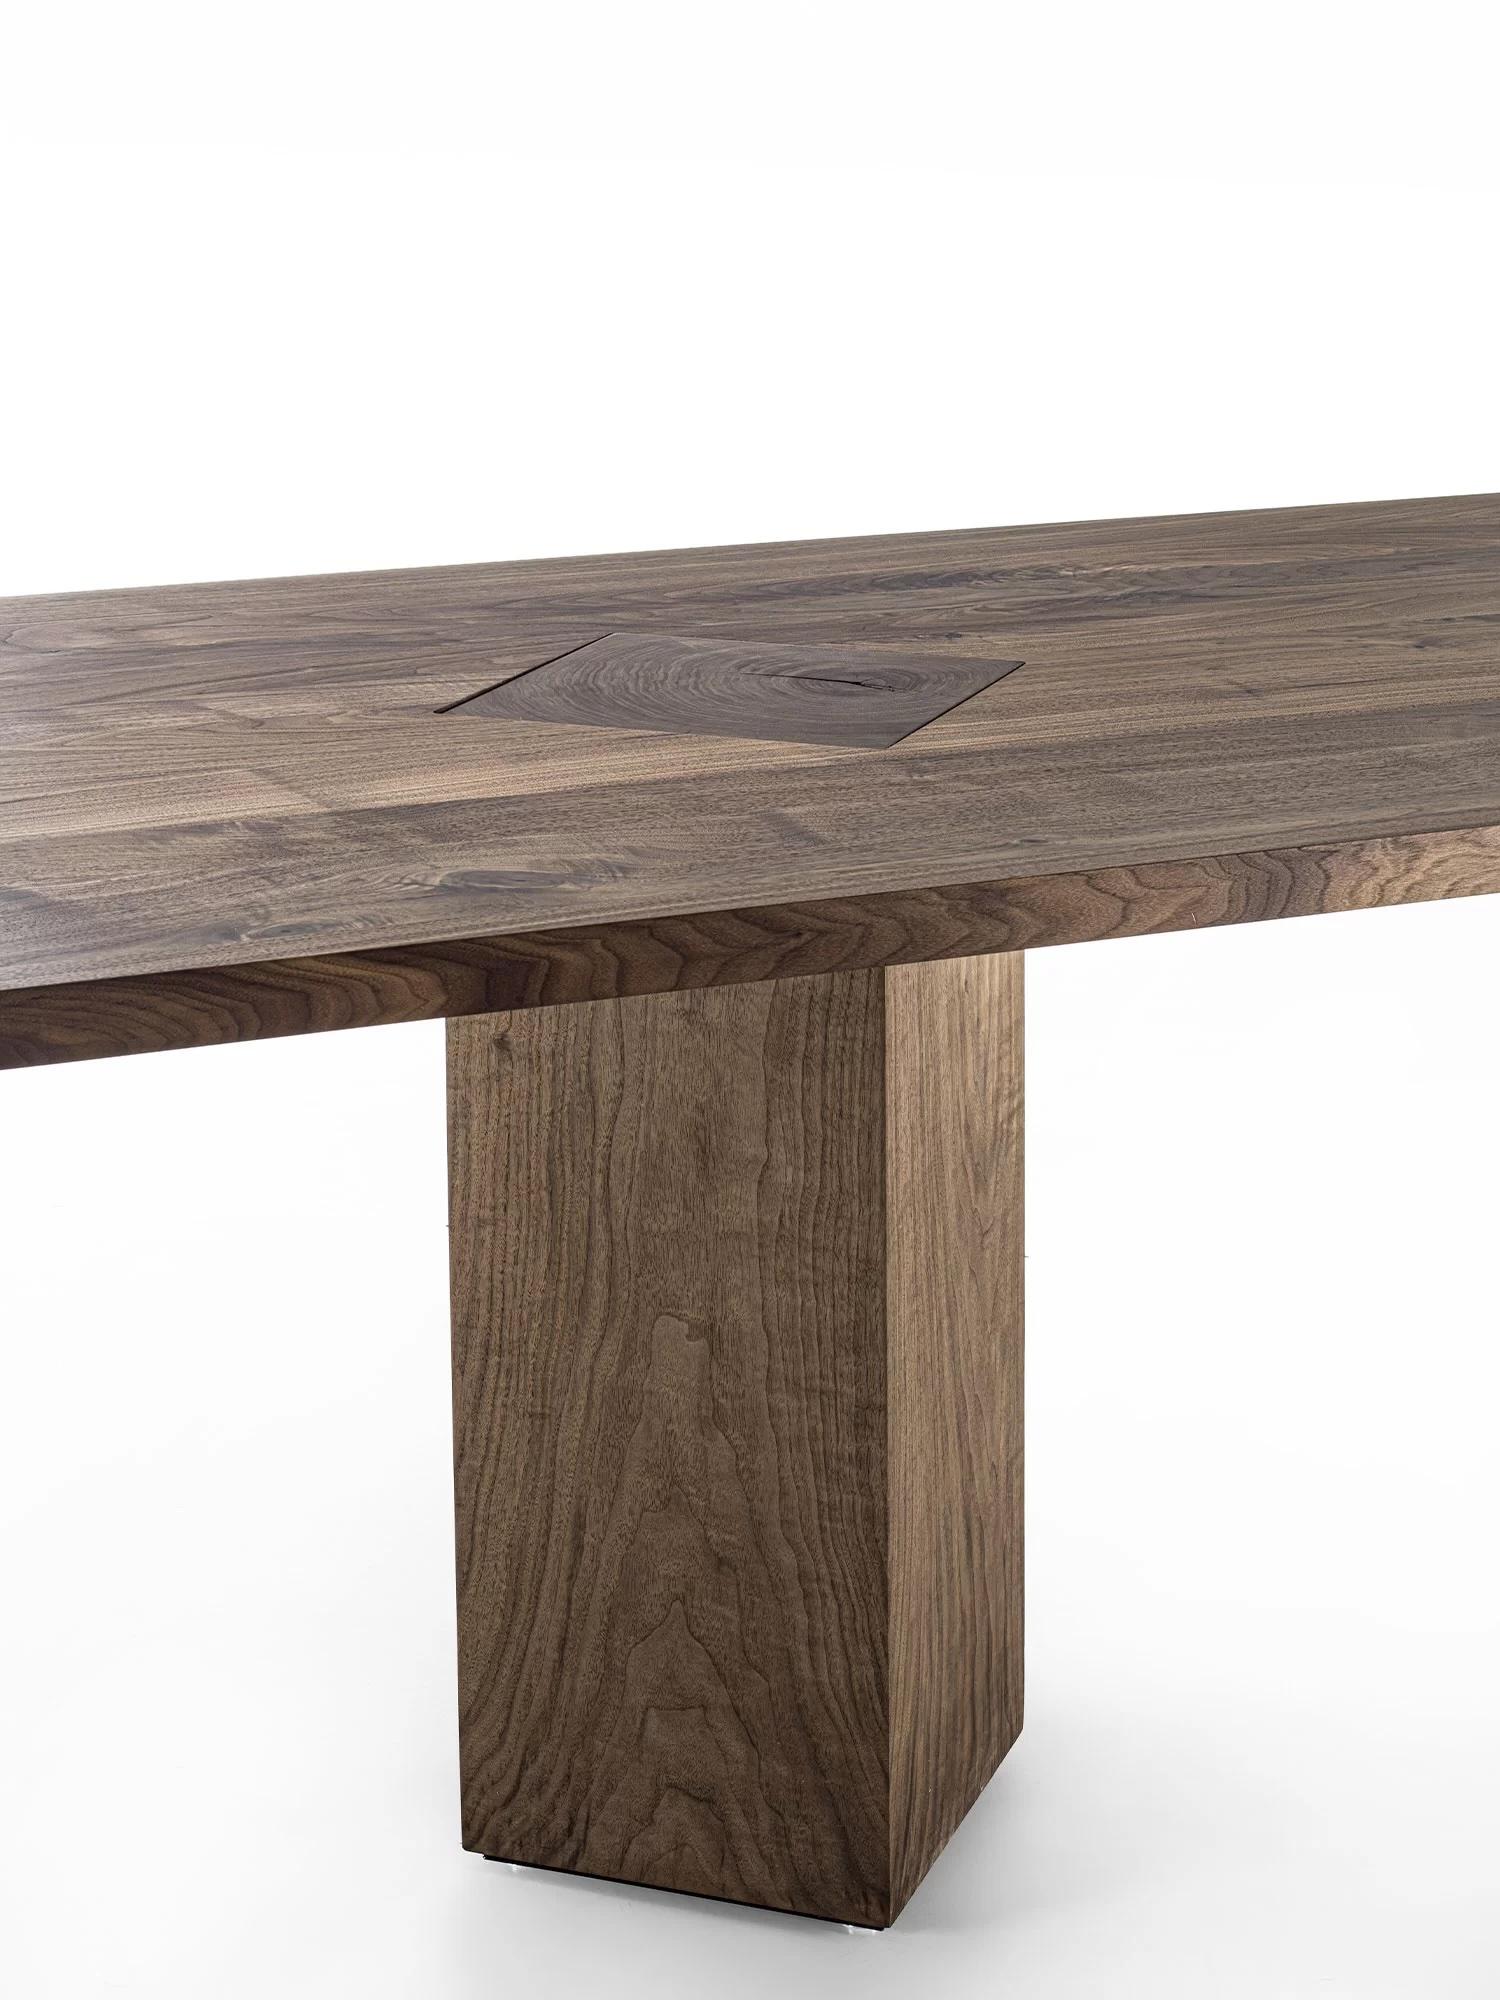 Contemporary Junior B Solid Wood Dining Table, Designed by Authentic Design, Made in Italy  For Sale